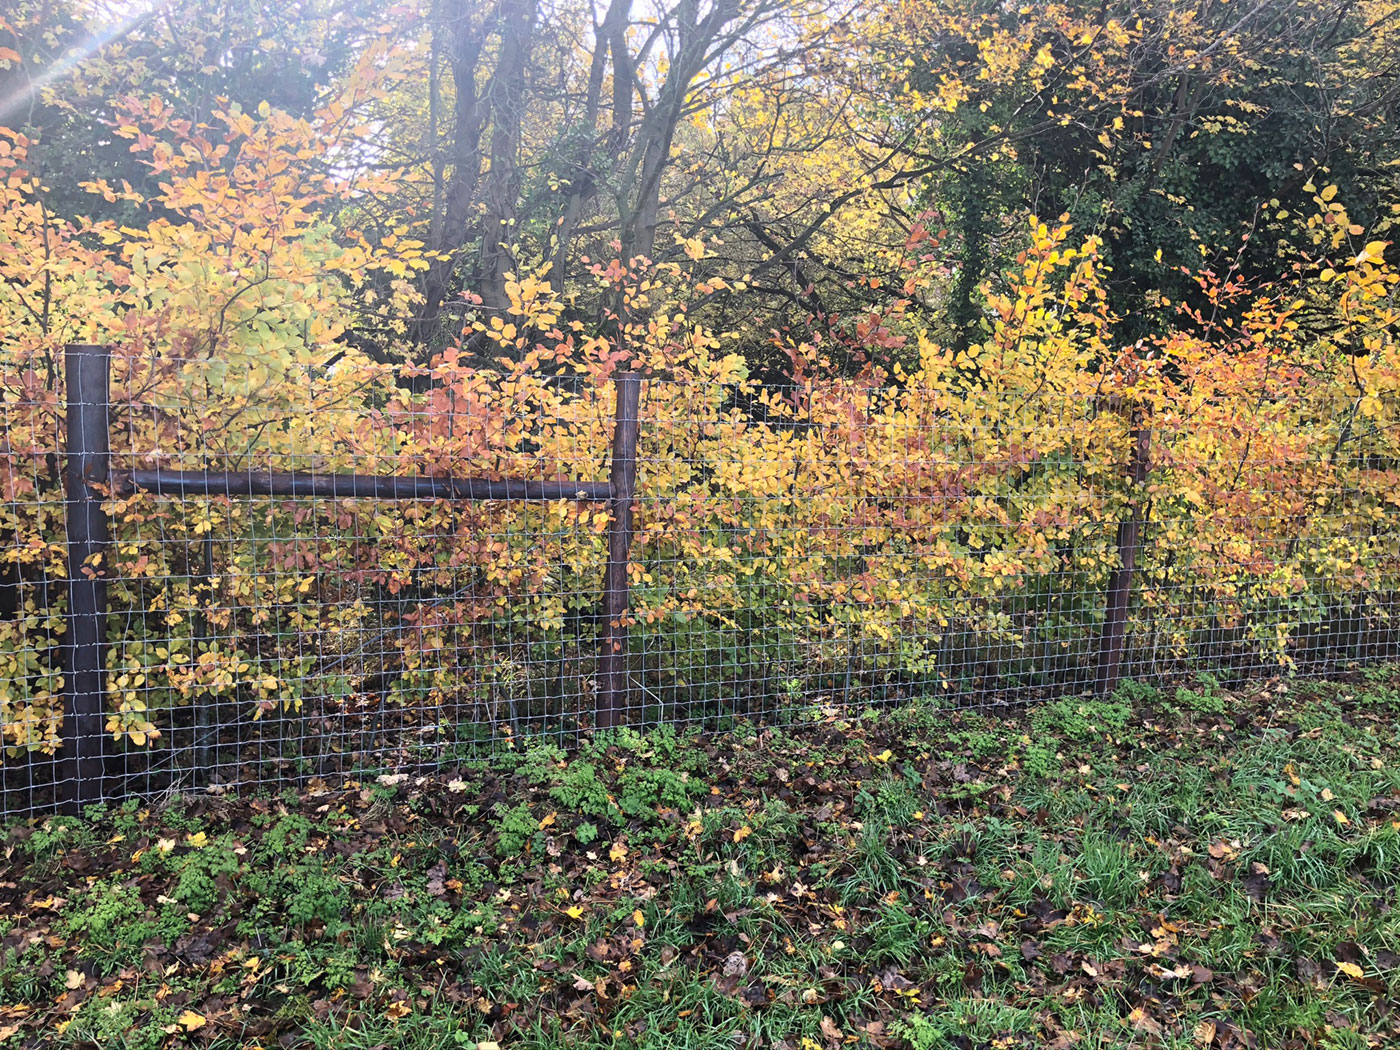 Agricultural Deer netting by Vincent Fencing